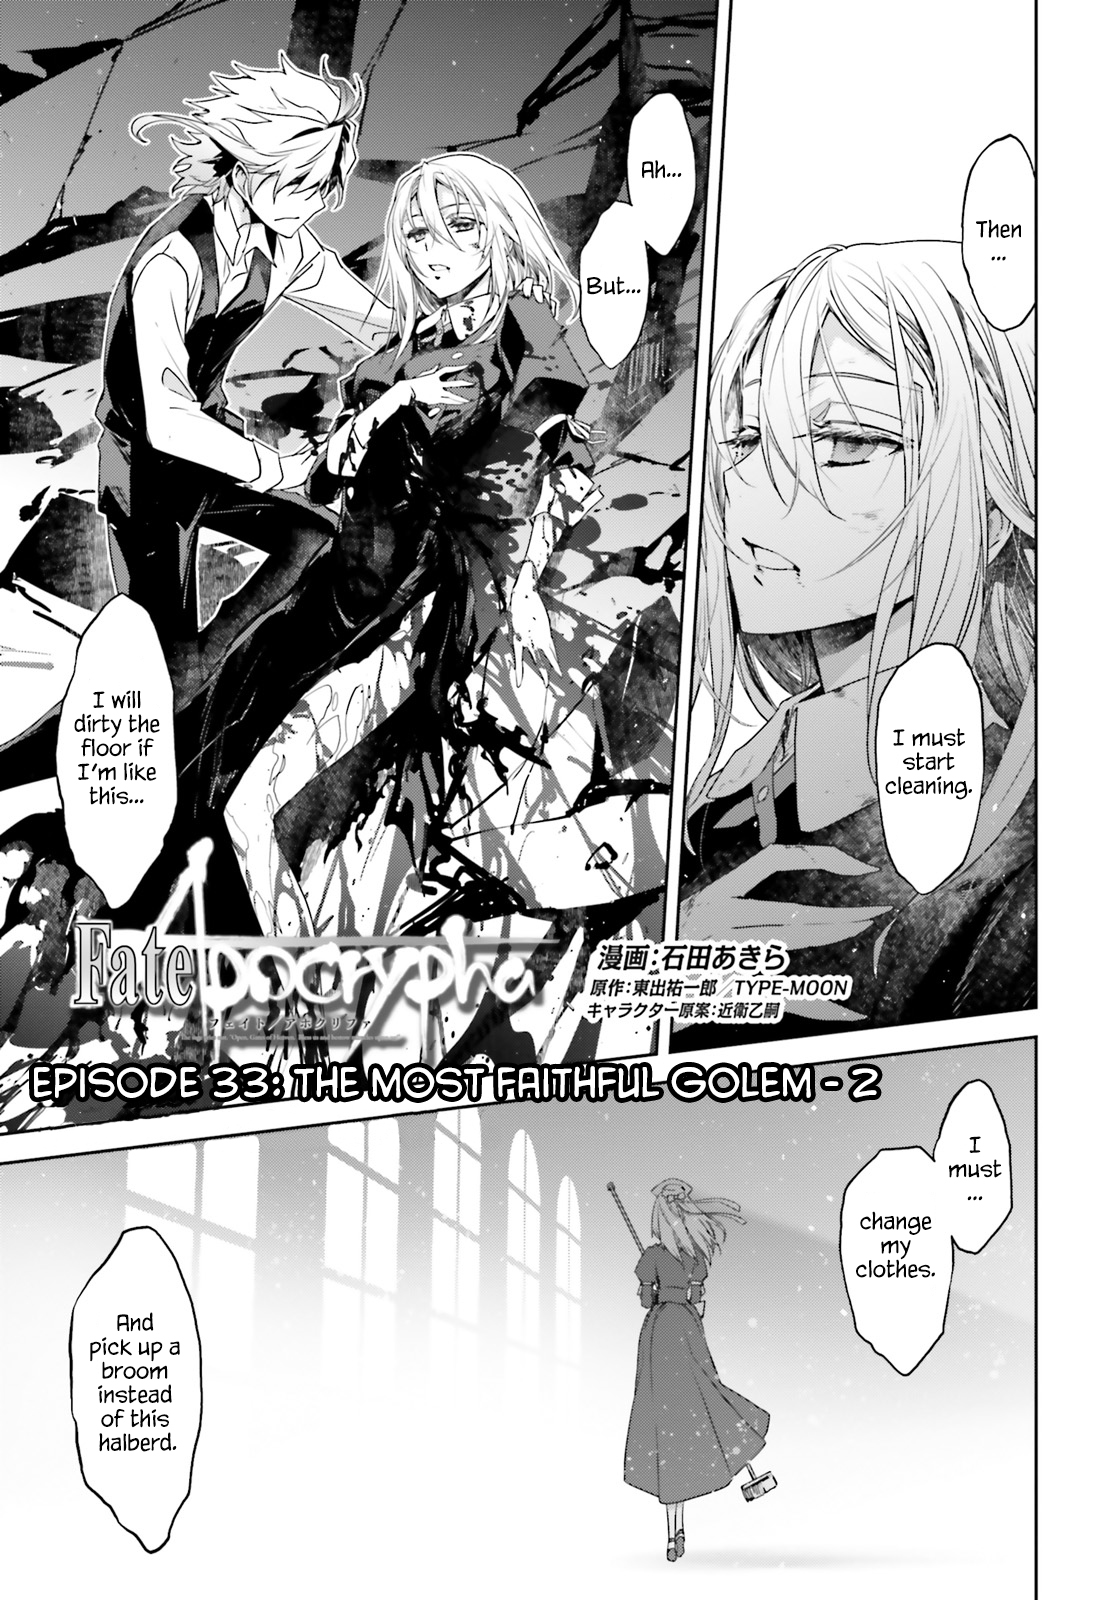 Fate/apocrypha Vol.8 Chapter 33.5: Episode: 33.5 The Most Faithful Golem 2 - Picture 2